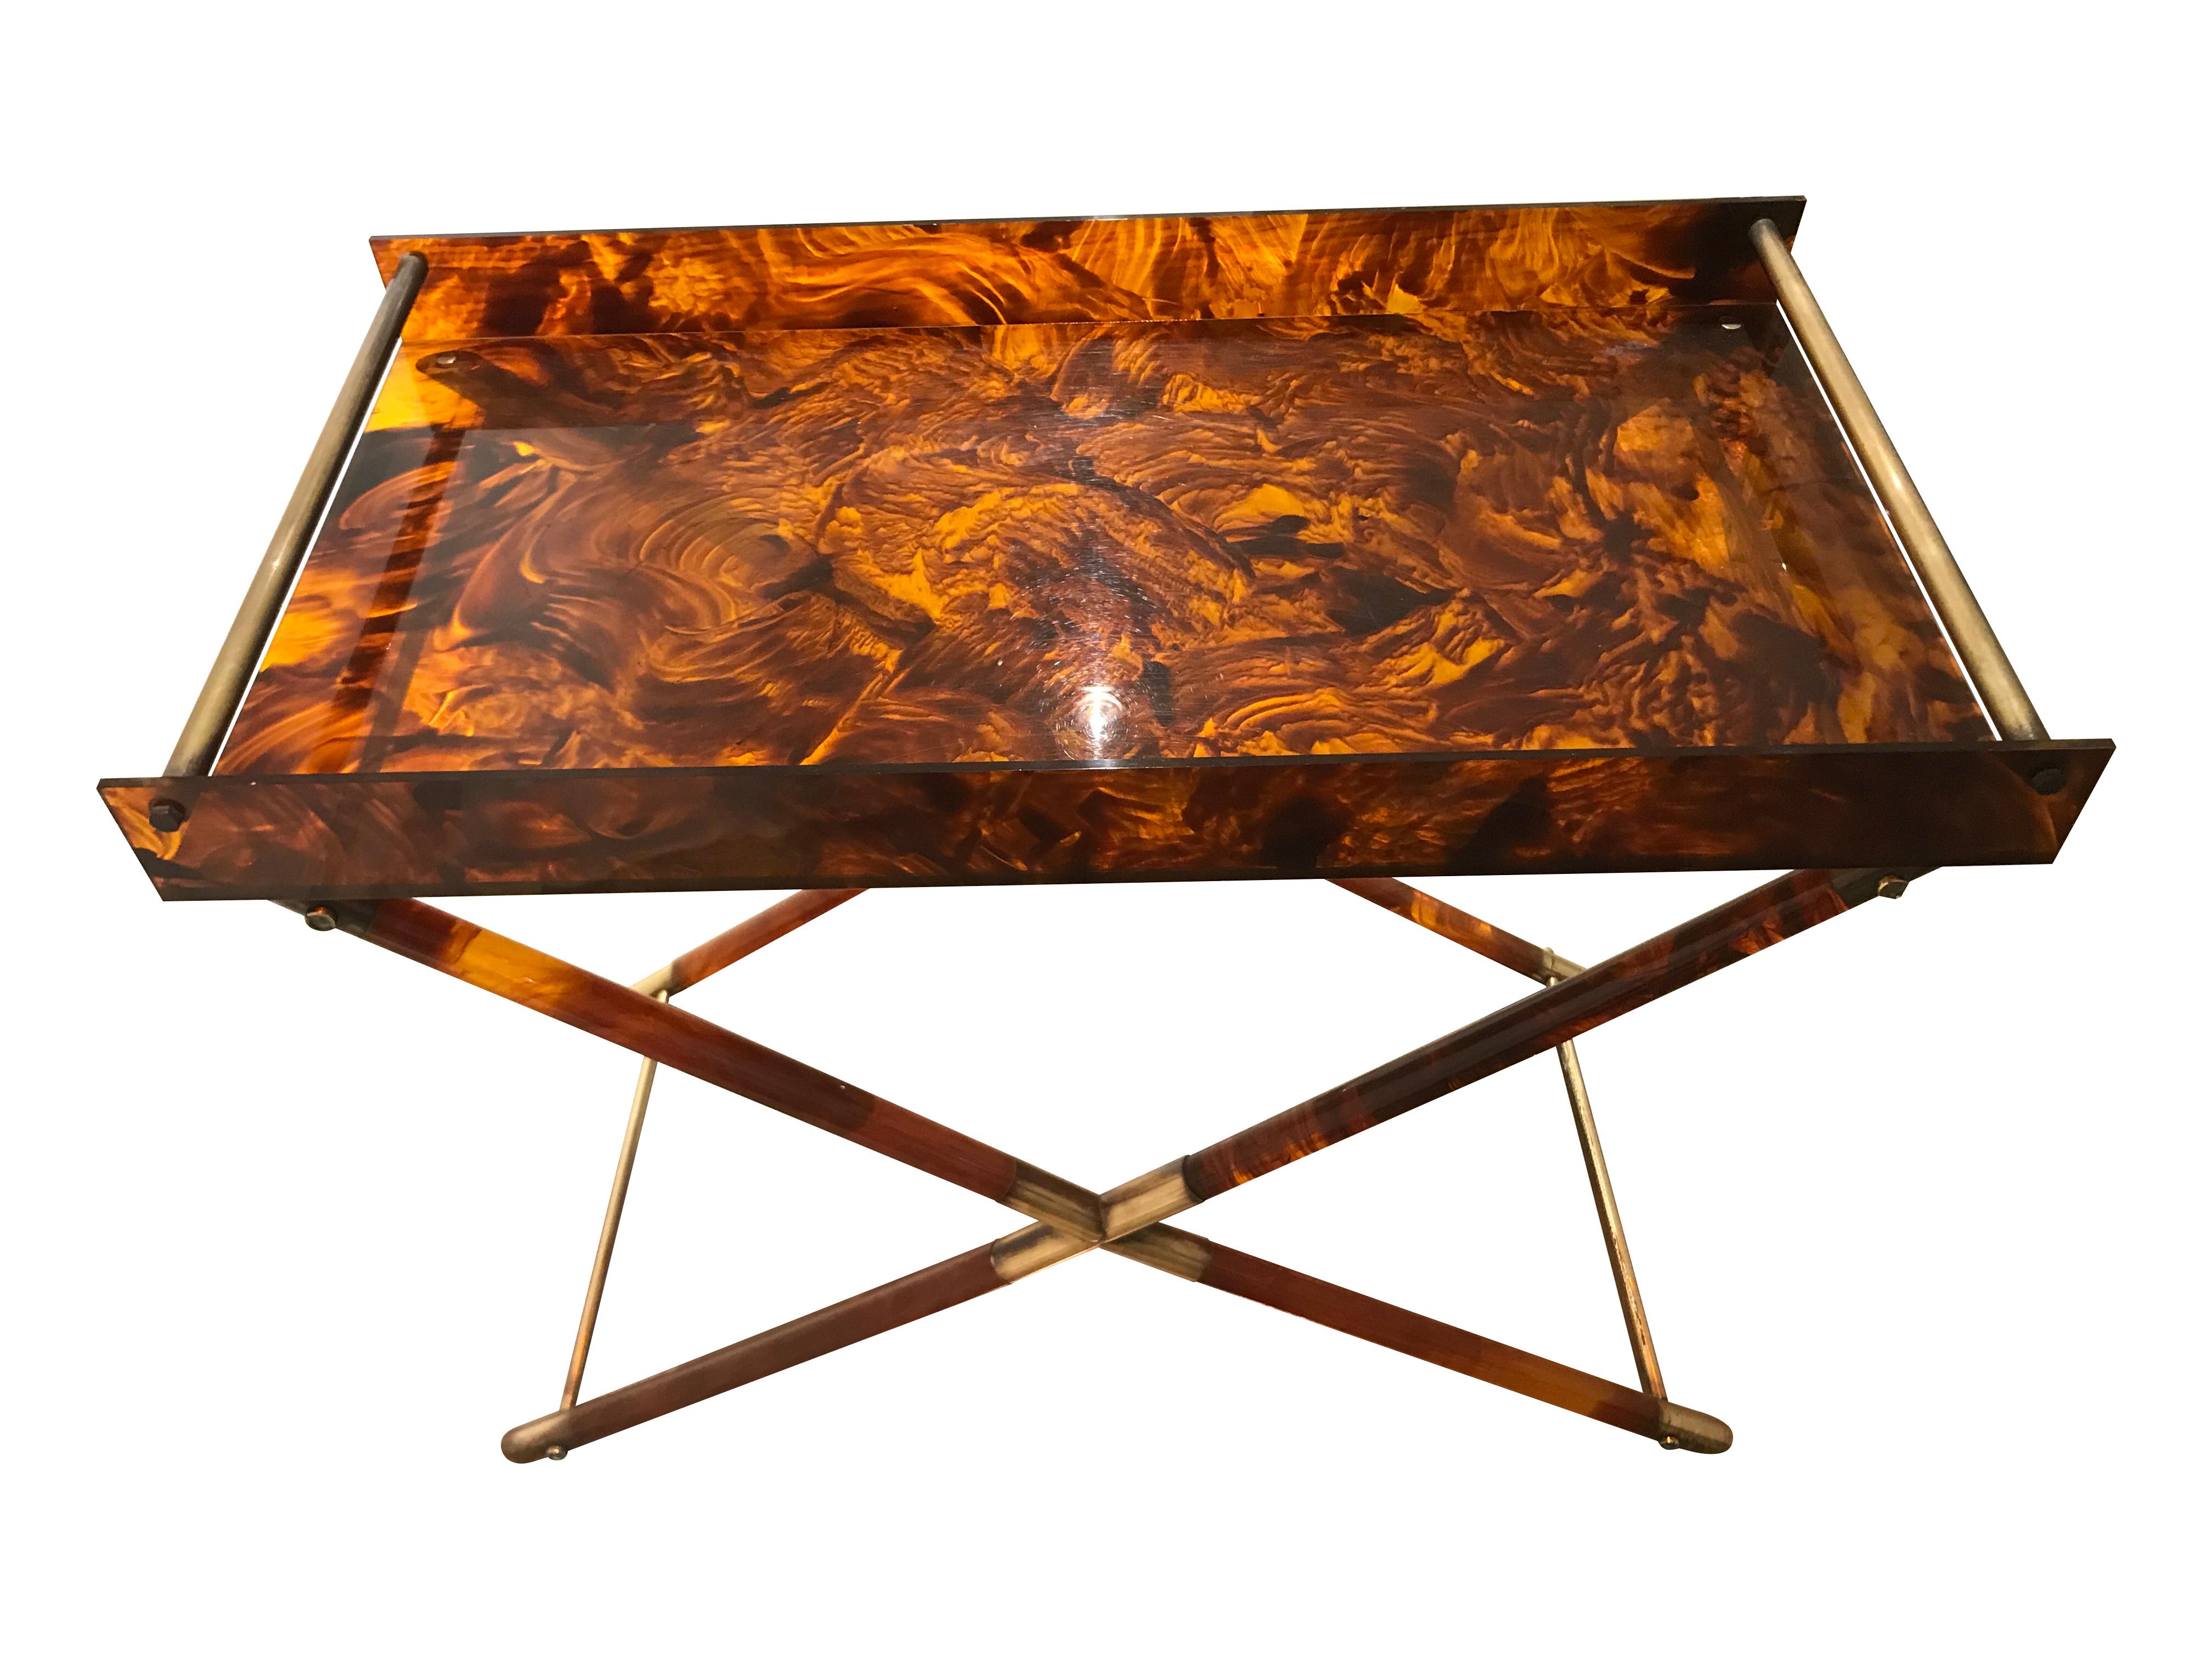 Faux Tortoiseshell Side Table with Brass Detailing (Messing)